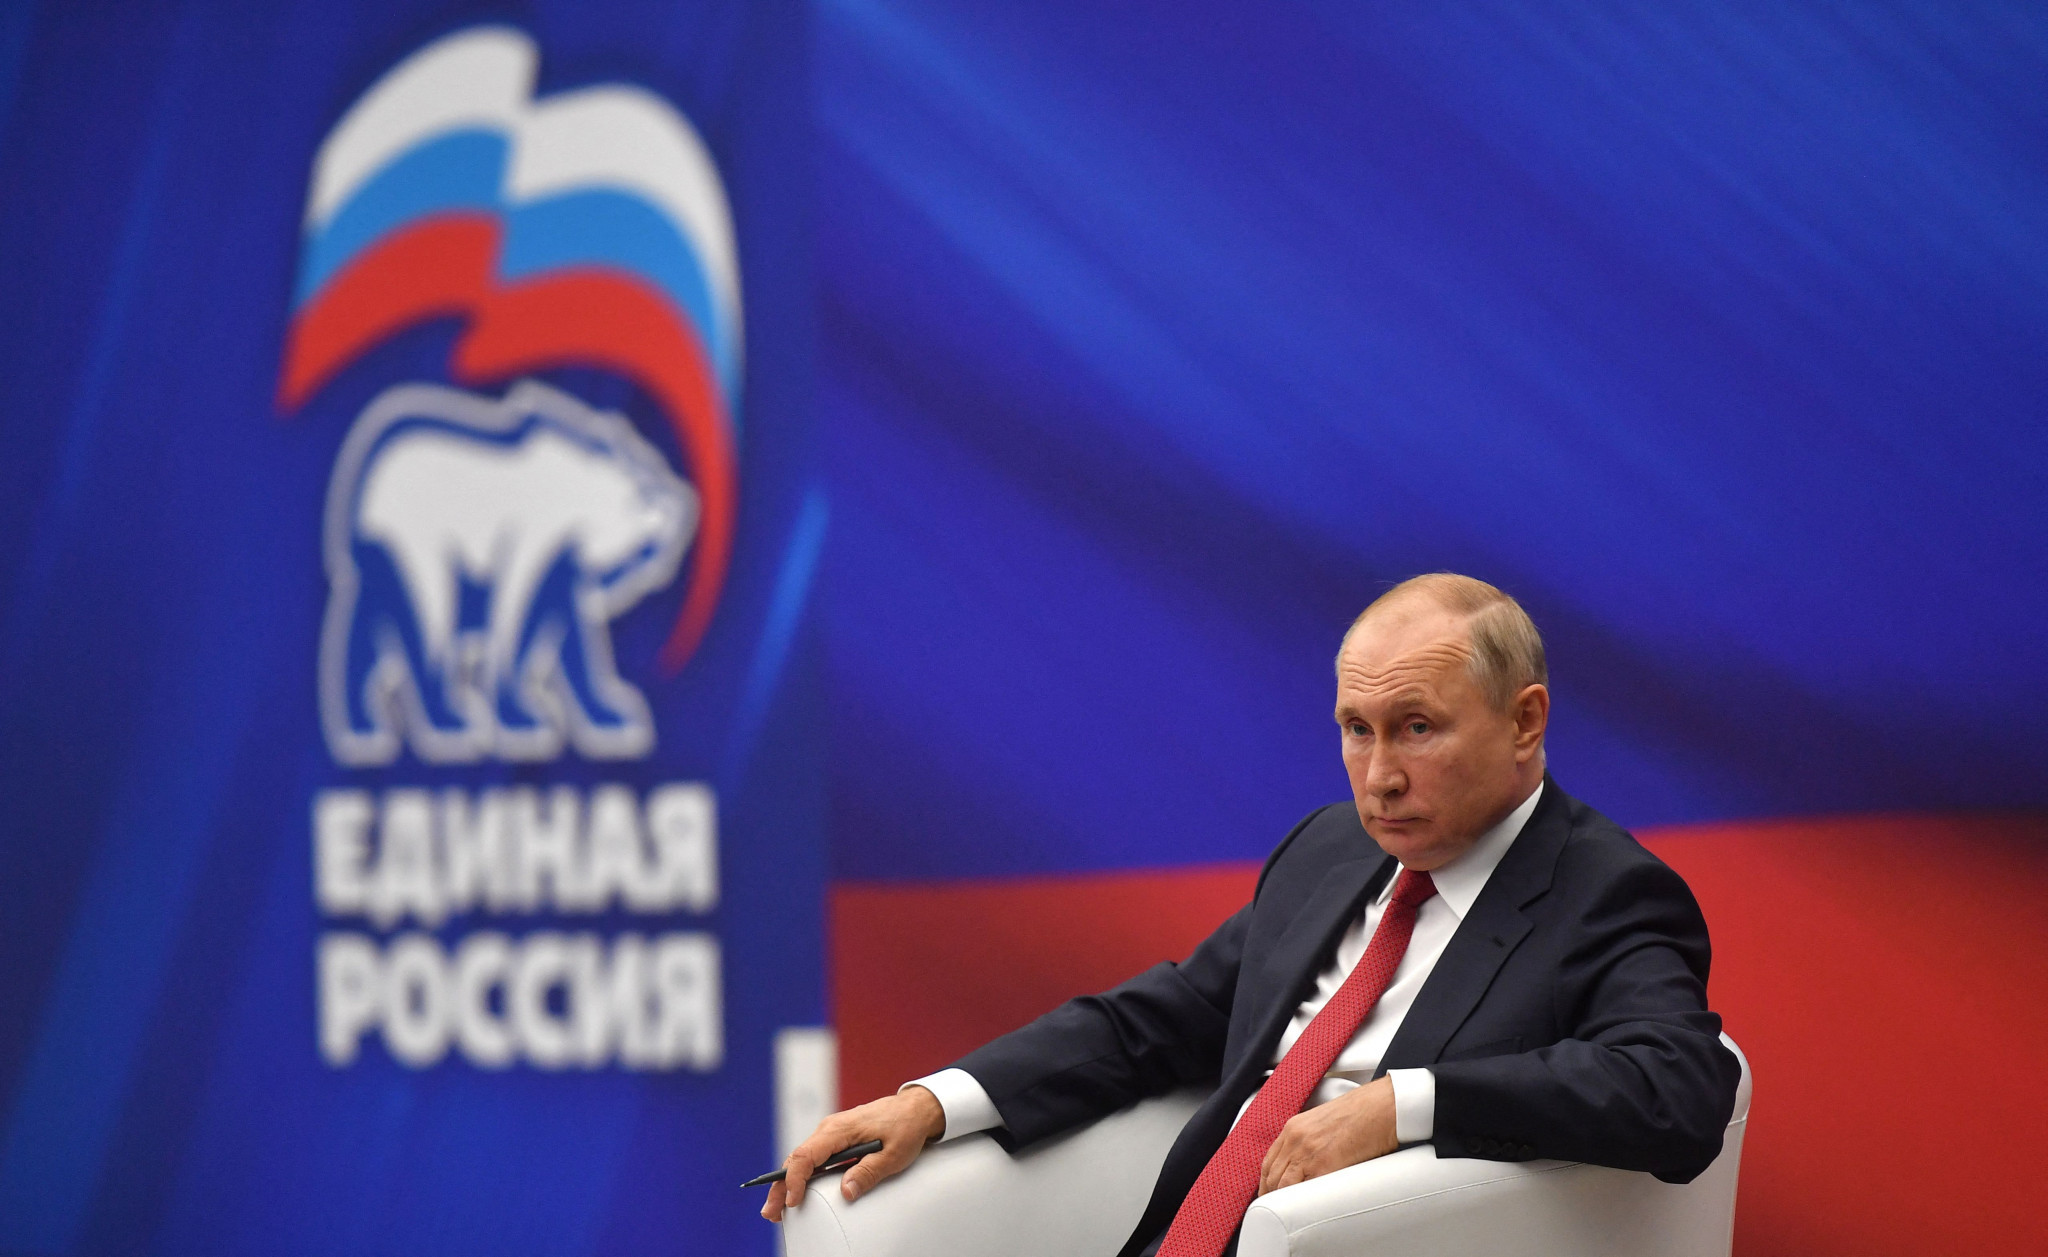 Vladimir Putin has revealed that Vladivostok is the latest Russian city to express an interest in bidding for the 2036 Olympic and Paralympic Games ©Getty Images